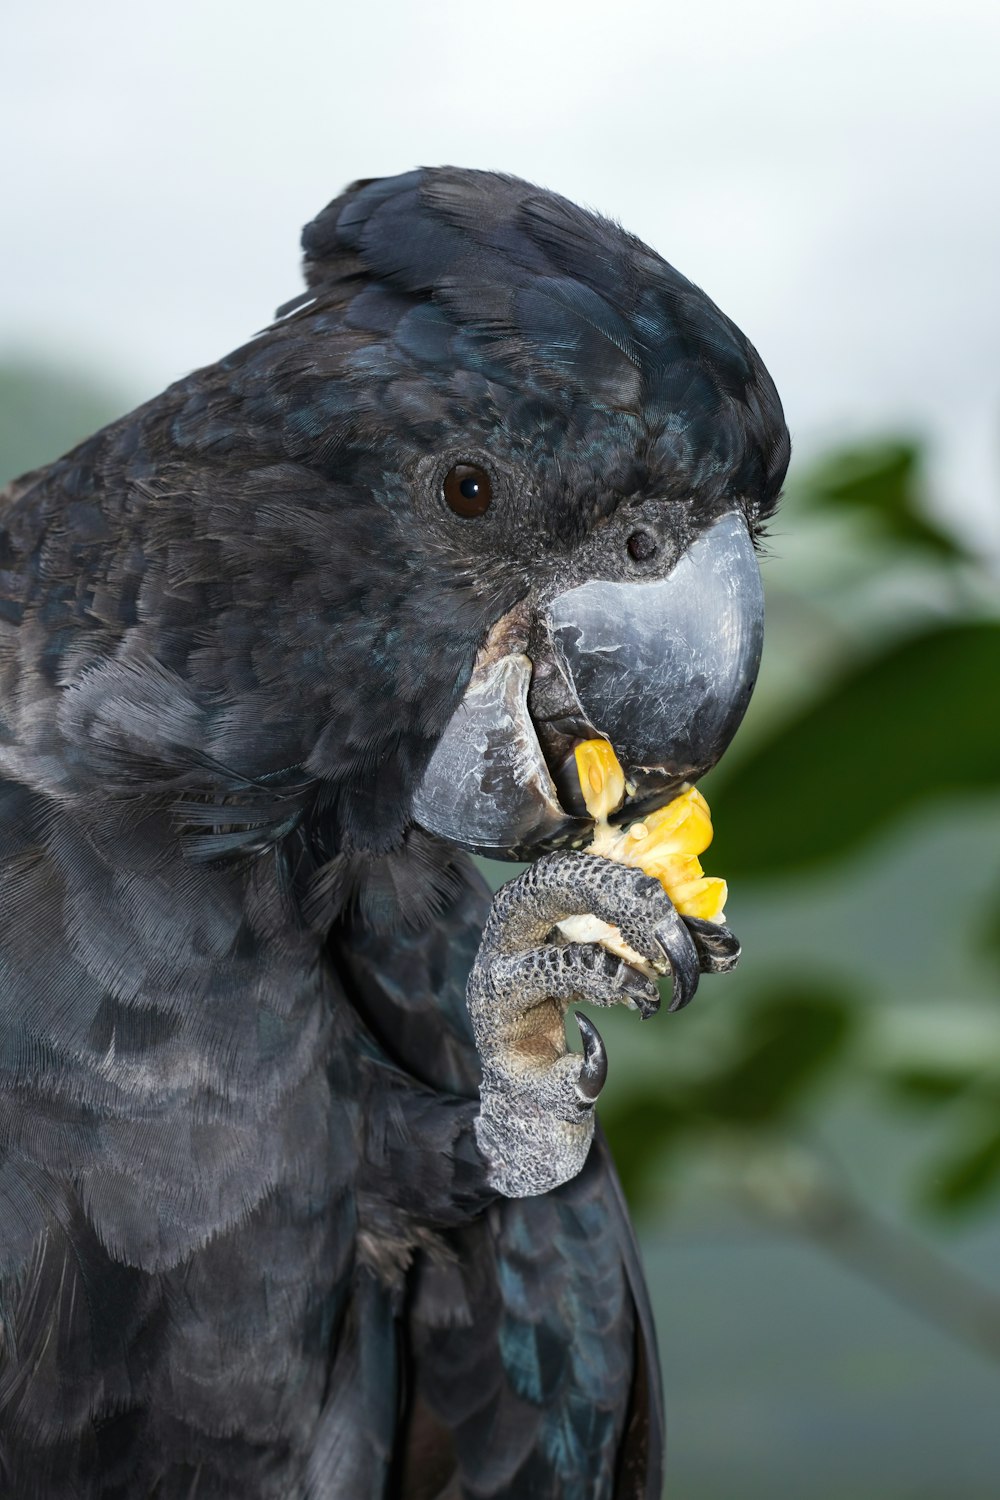 a close up of a parrot eating a banana